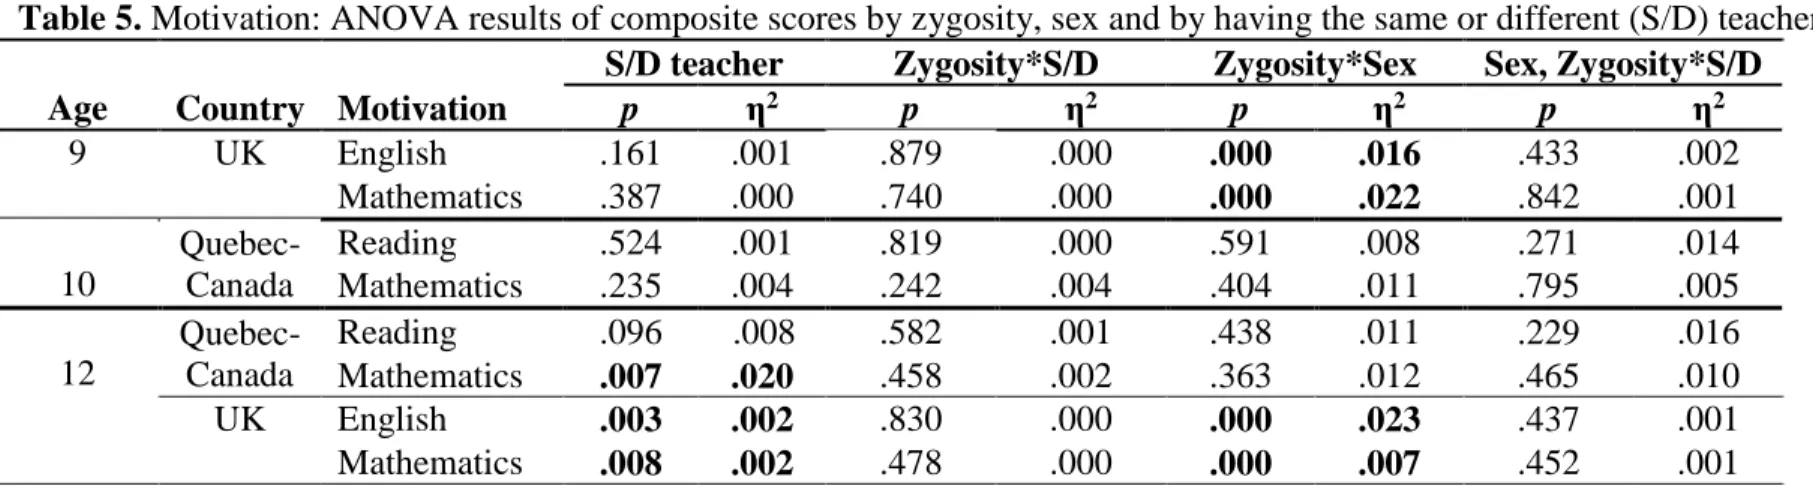 Table 5. Motivation: ANOVA results of composite scores by zygosity, sex and by having the same or different (S/D) teachers  S/D teacher  Zygosity*S/D  Zygosity*Sex  Sex, Zygosity*S/D 